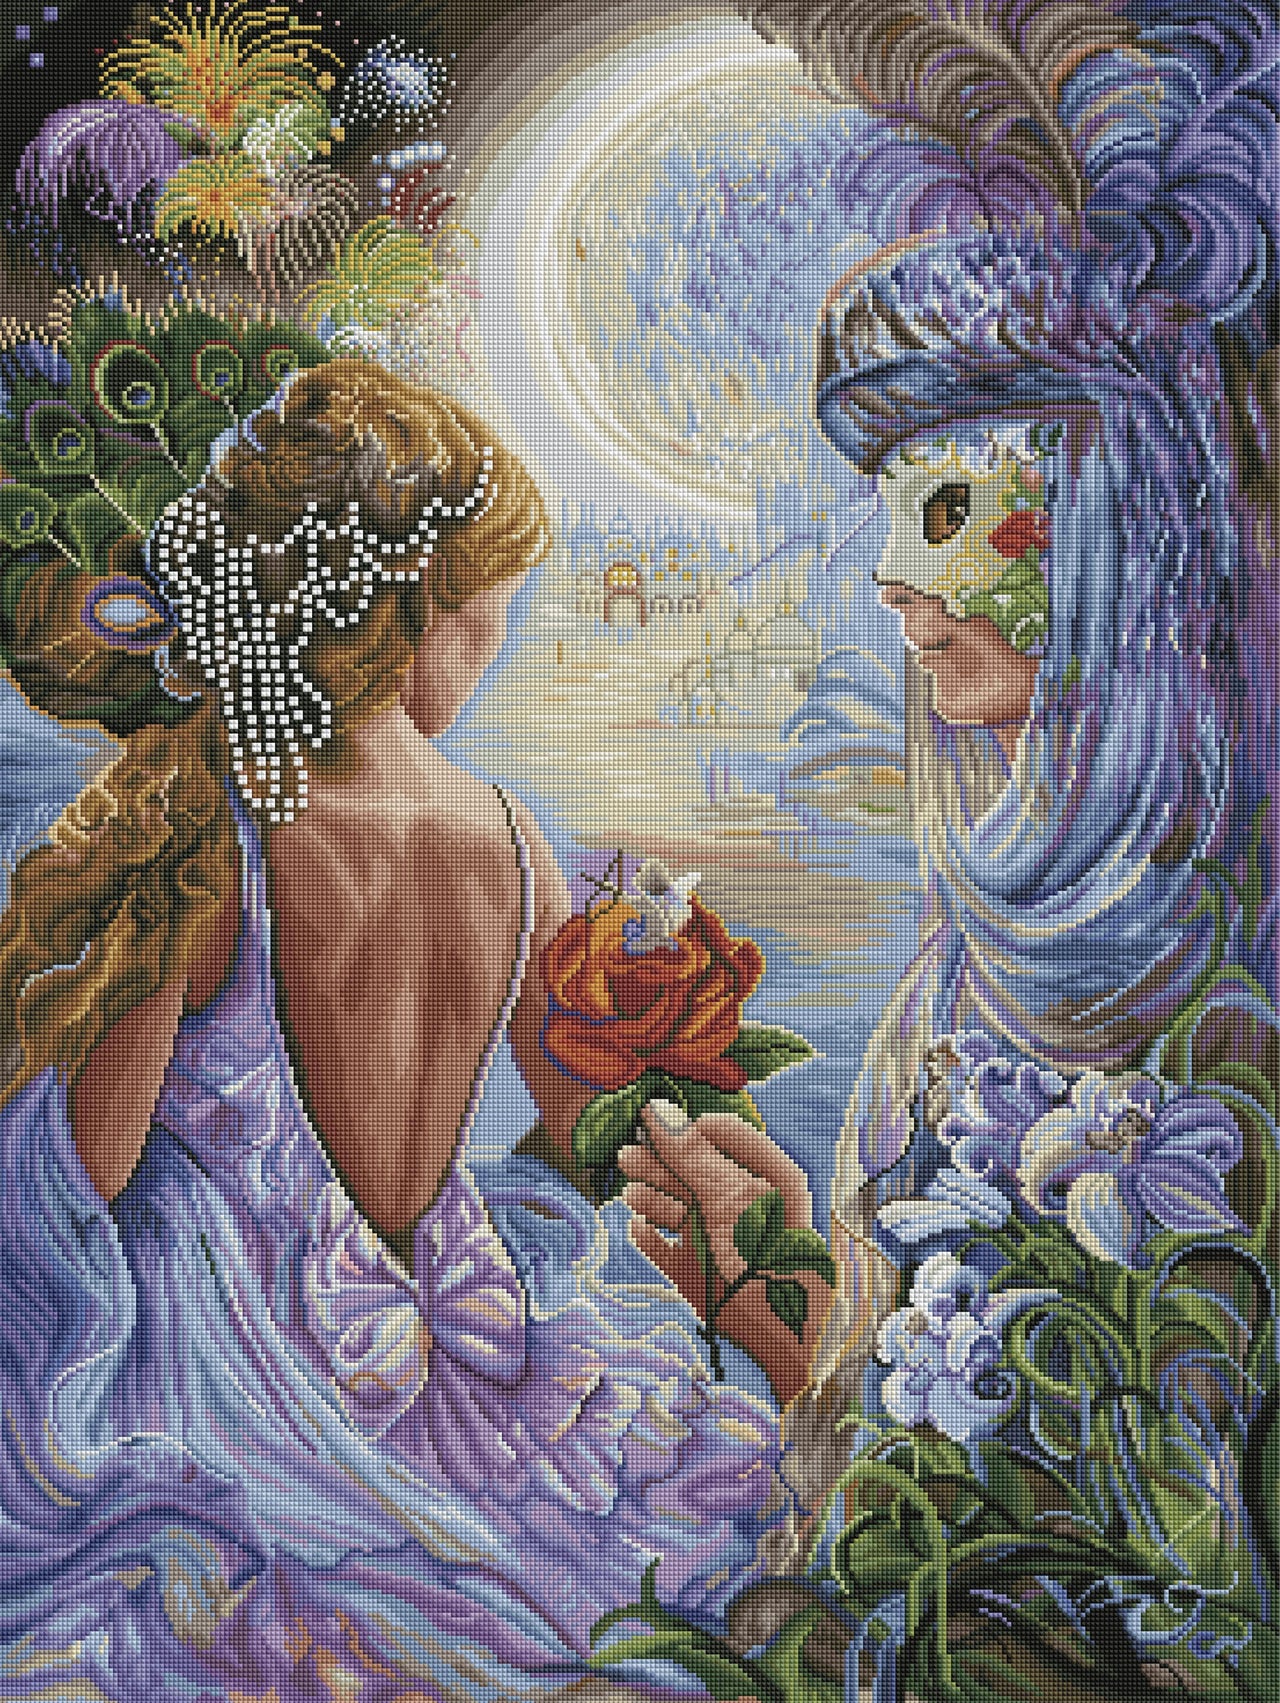 Diamond Painting Masque of Love 27.6" x 36.6″ (70cm x 93cm) / Square with 58 Colors including 3 ABs